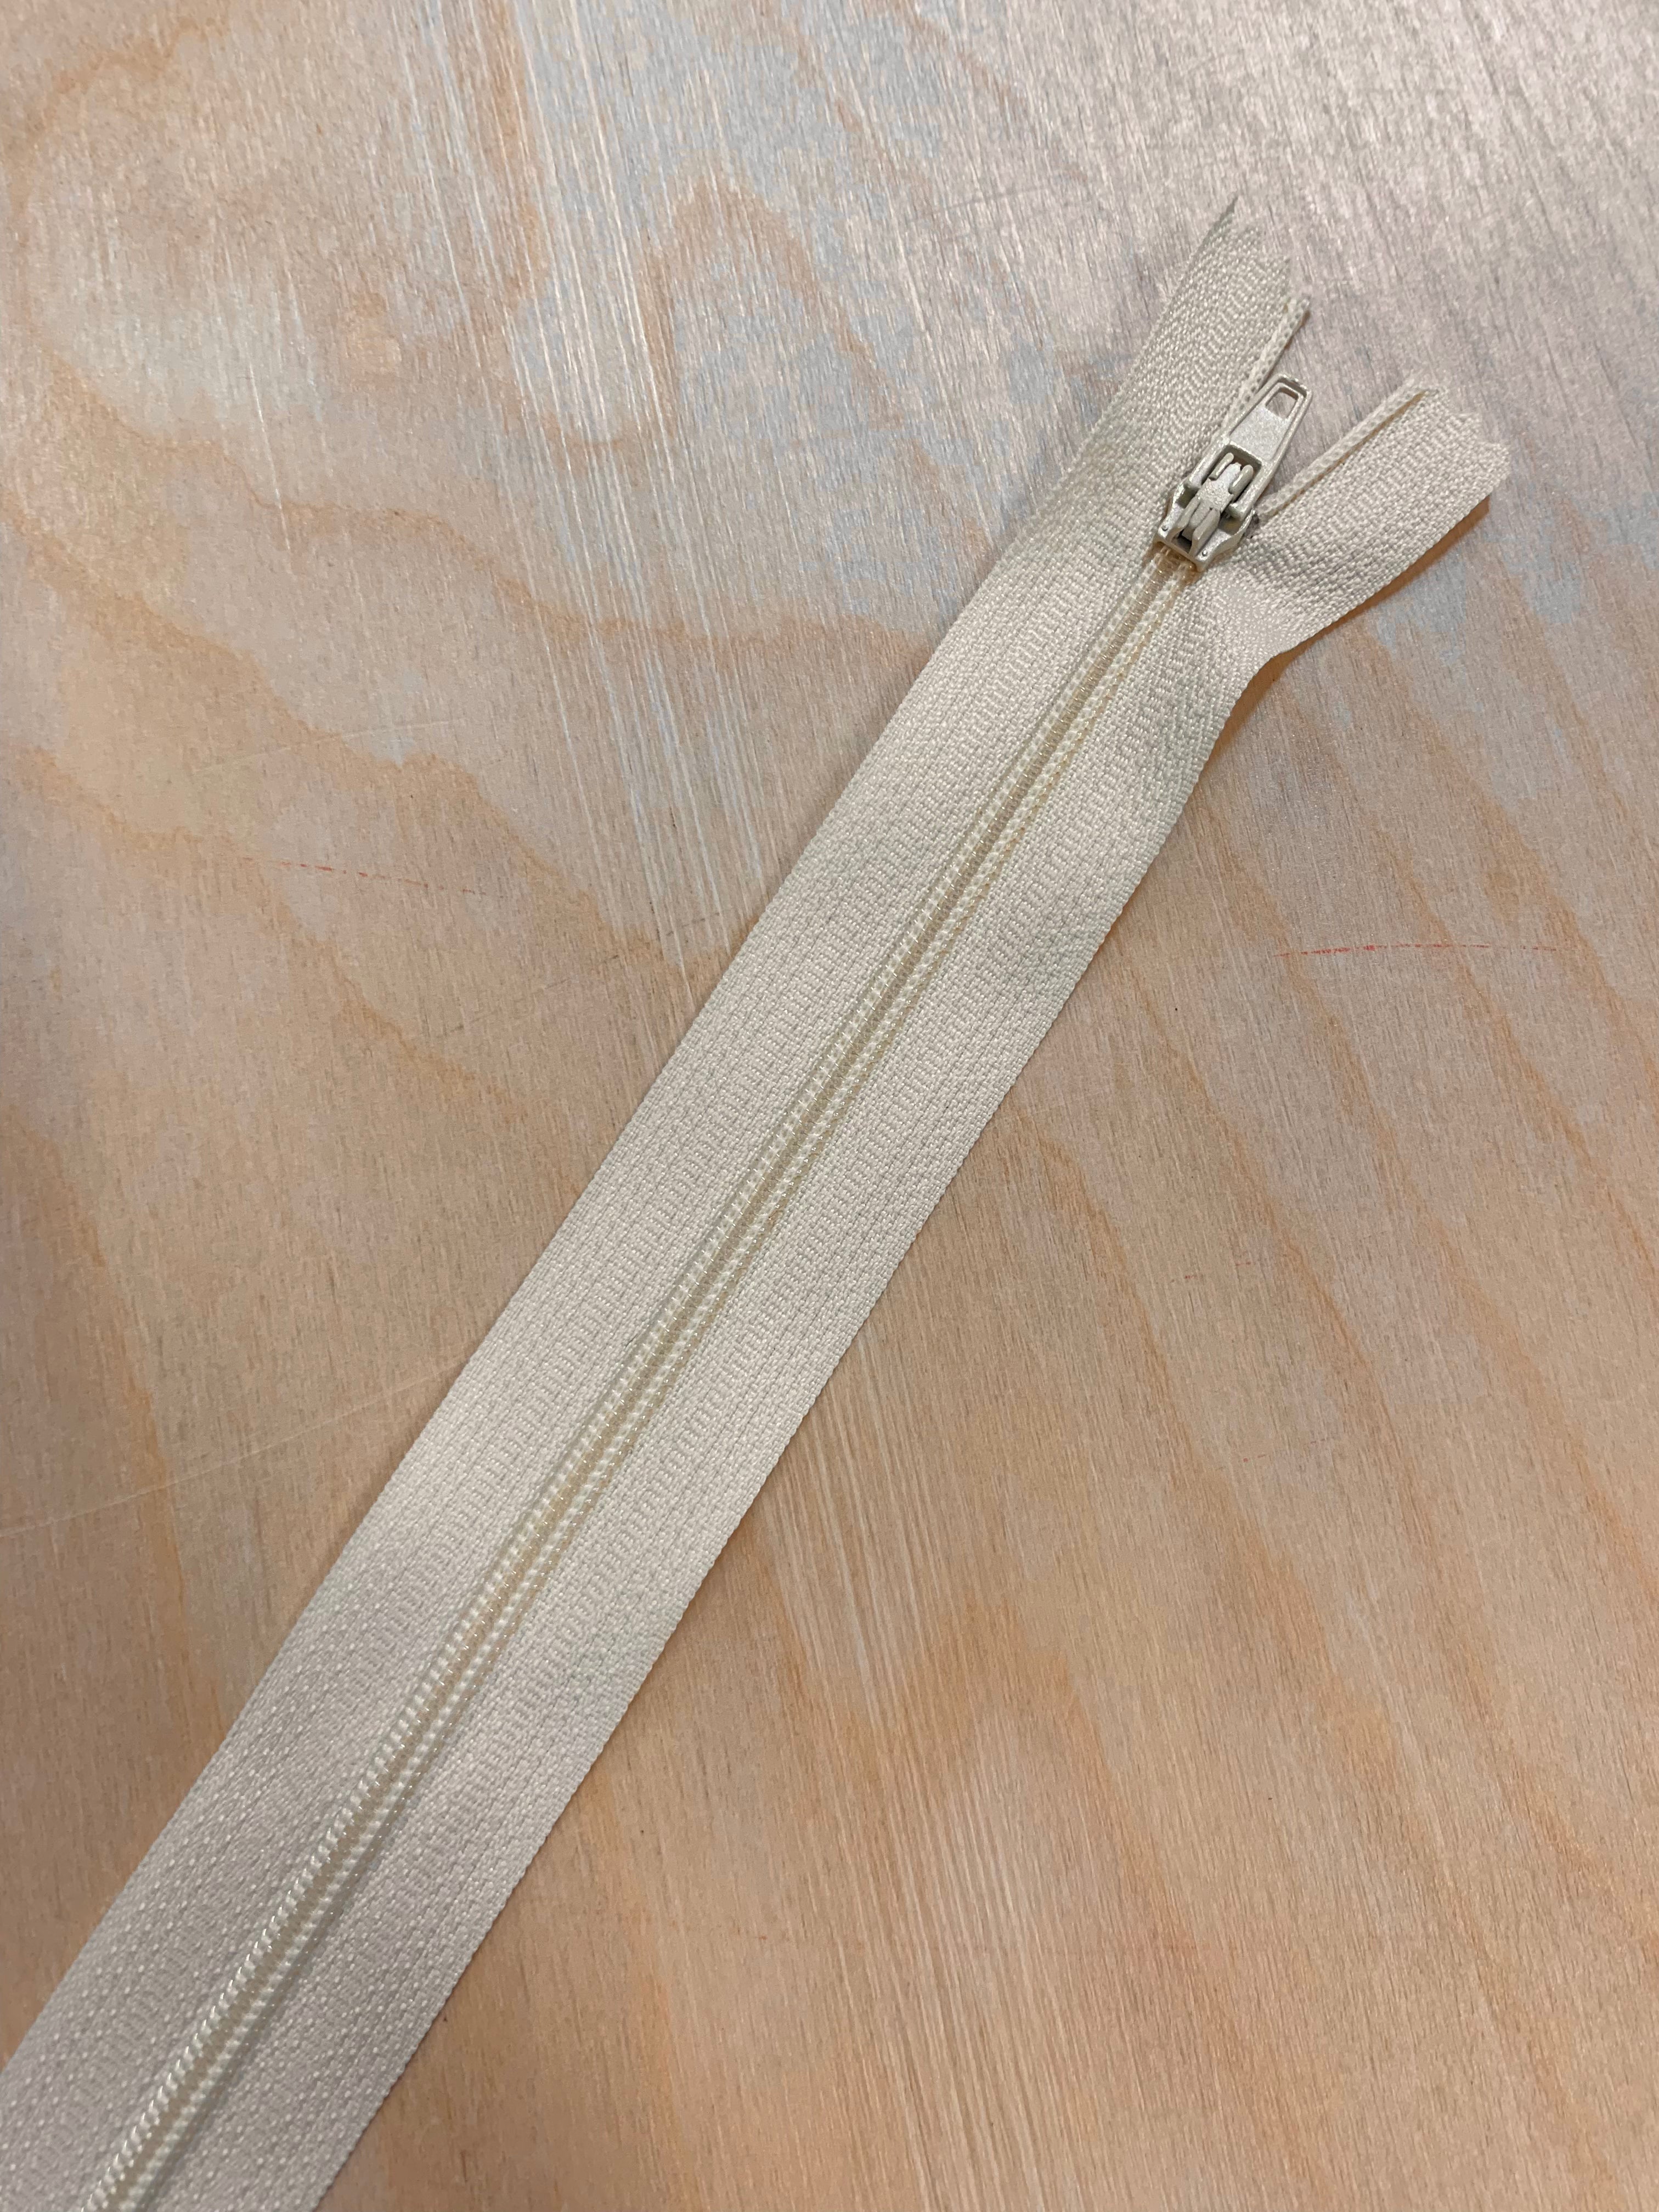 45cm / 18inch Zips (Closed -Ended)